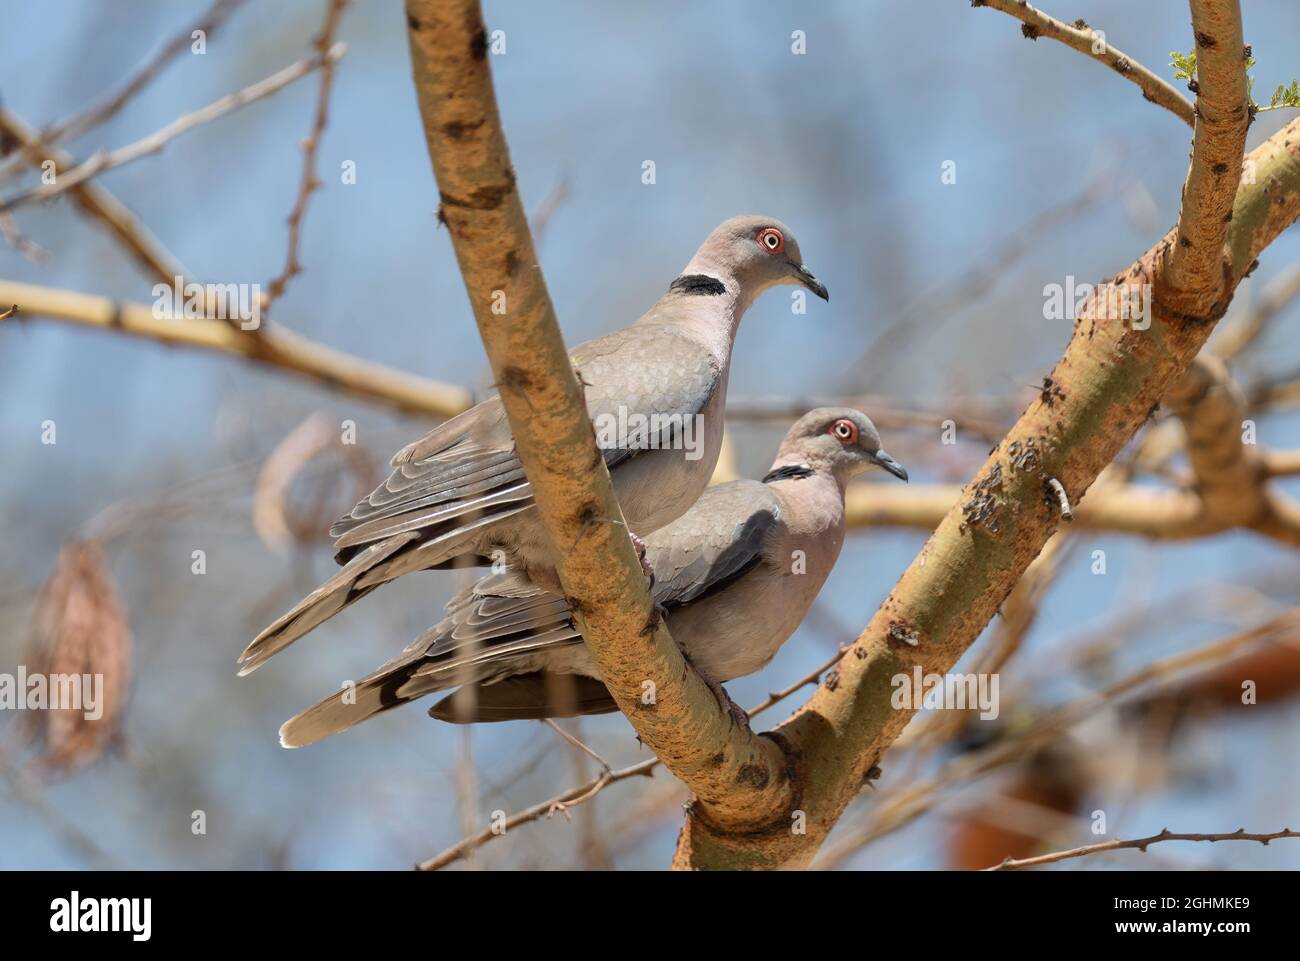 Mourning Collared Dove - Streptopelia decipiens, beautiful common dove from African woodlands and gardens, lake Ziway, Ethiopia. Stock Photo